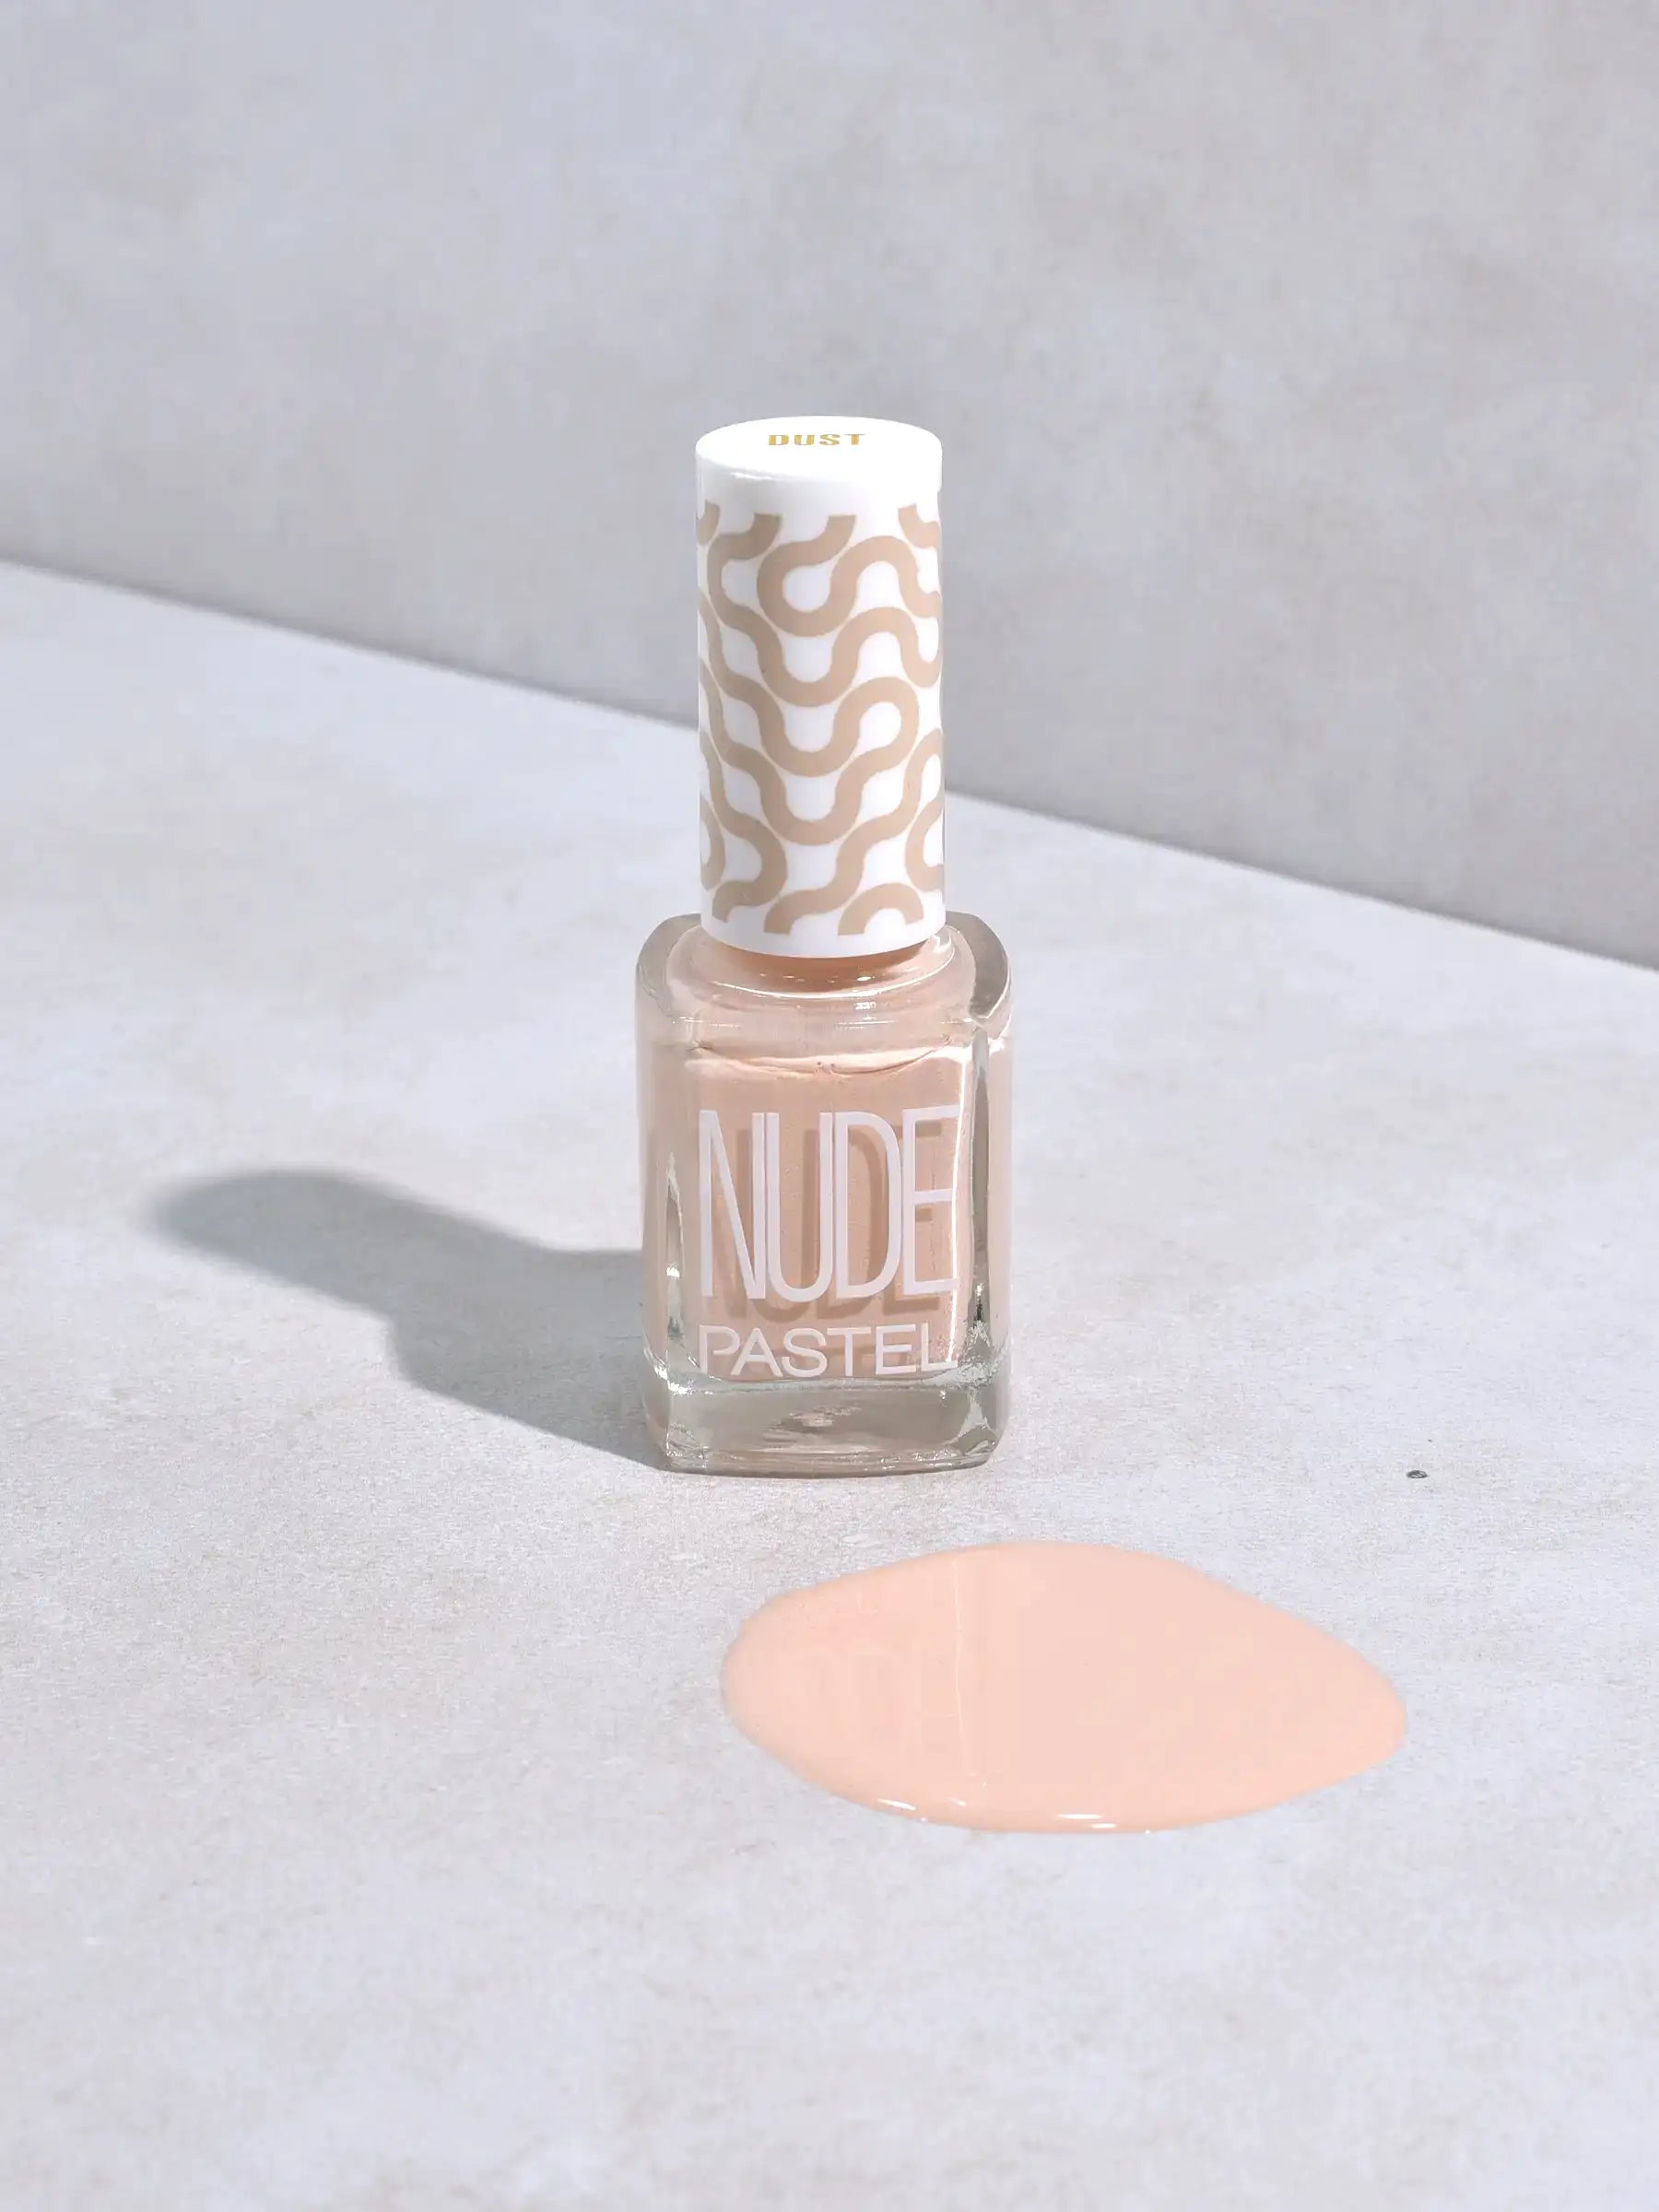 NUDE BY PASTEL NAIL POLISH 763 DUST